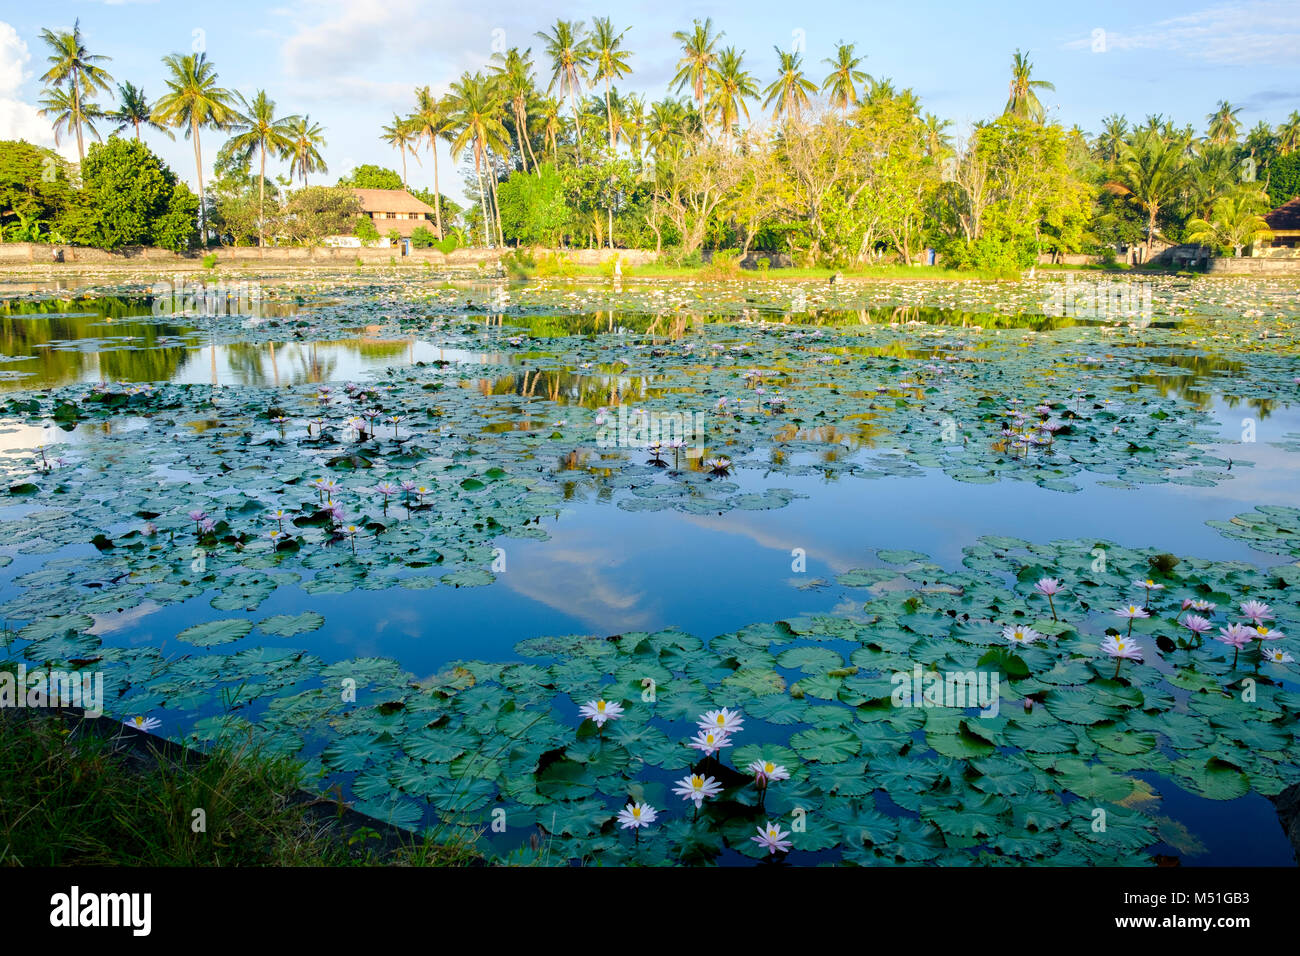 Water lillies on the incorrectly named 'Lotus Pond' after sunrise, Candidasa,, Bali, Indonesia. Stock Photo